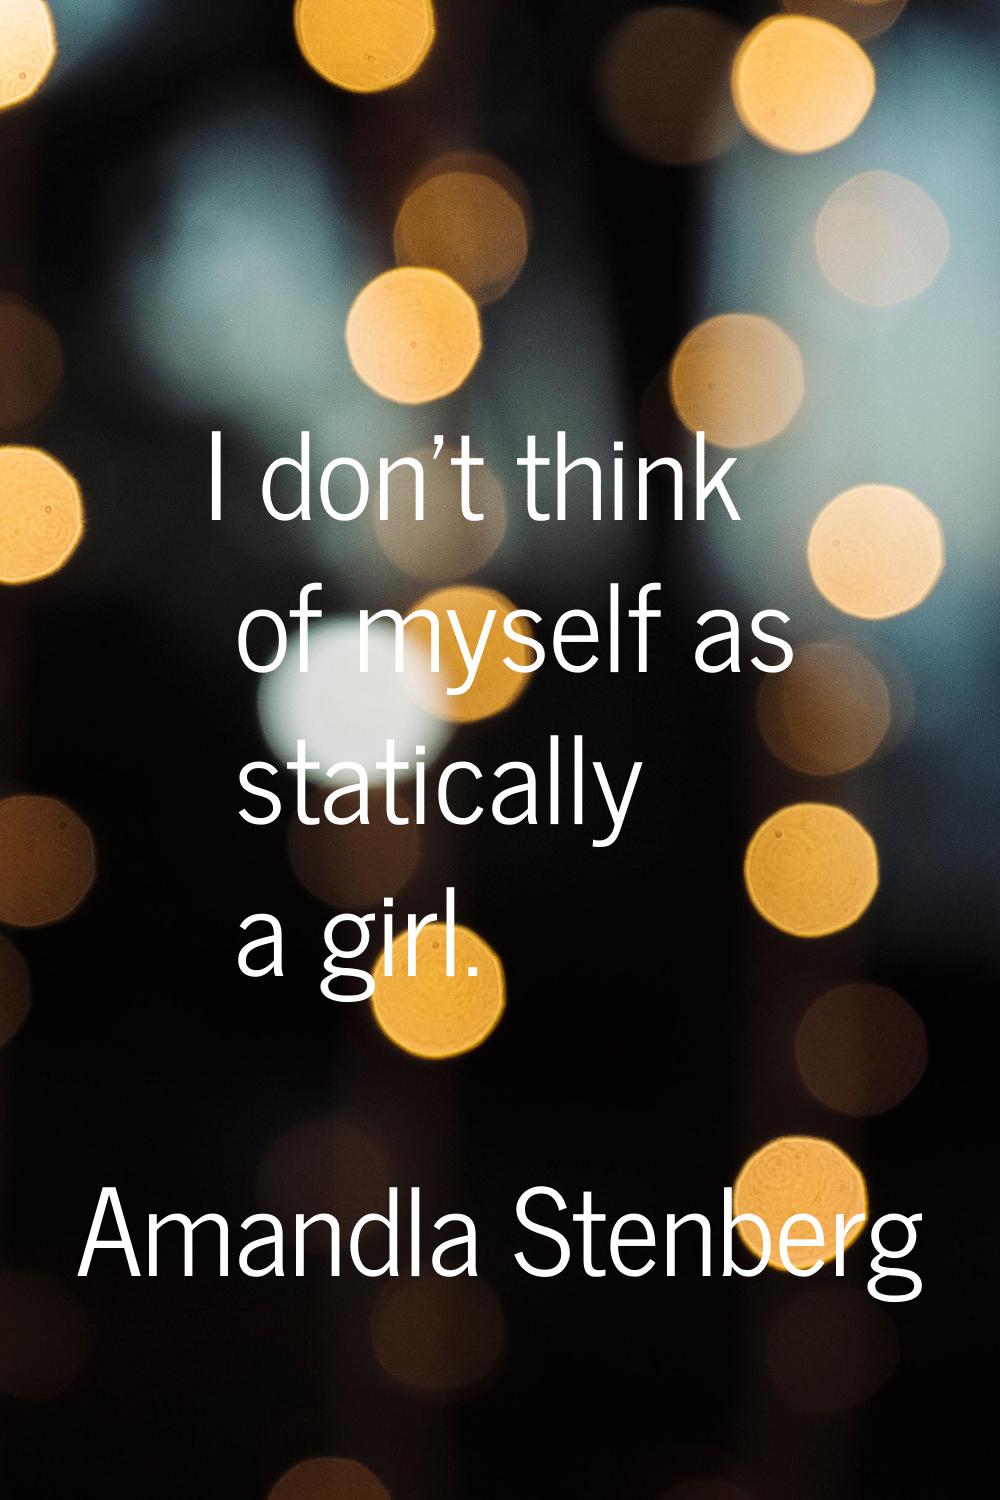 I don't think of myself as statically a girl.